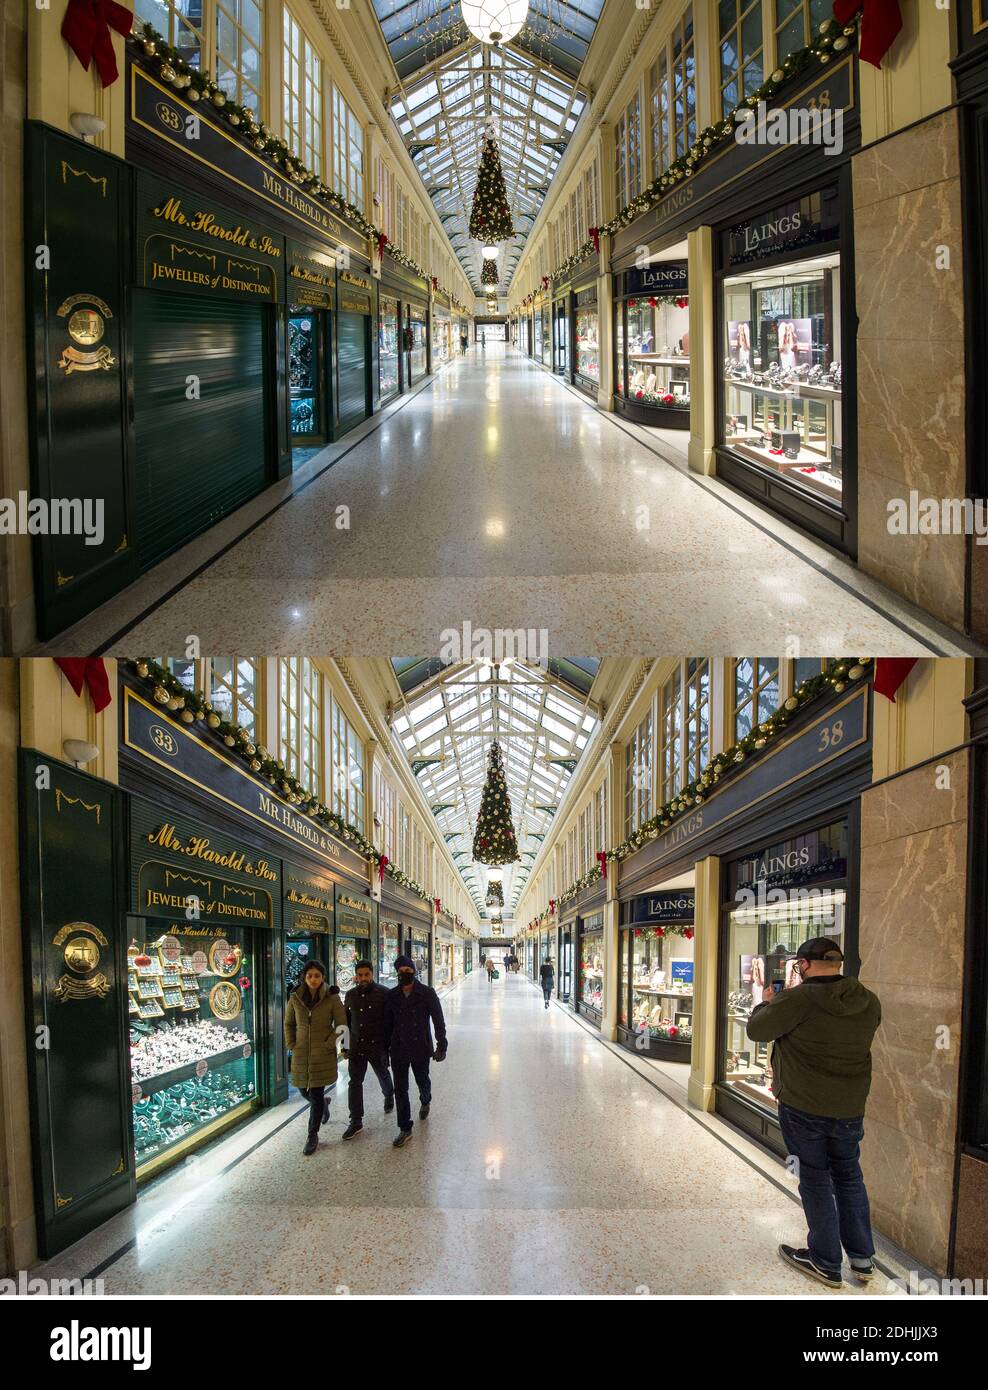 Glasgow, Scotland, UK. 11th Dec, 2020. Pictured: The Jeweller's Arcade; (left) Image taken 10th December. (right) image taken today, 11th December. Composite images taken 24 hours apart, showing Glasgow's city ‘style mile' which is Buchanan Street showing the quiet scenes when it was in phase 4 lockdown on the 10th December 2020. Today 11th December Glasgow is in phase 3 lockdown where all non-essential shops are open, giving shoppers the chance to grab a last minute bargain for Christmas. Credit: Colin Fisher/Alamy Live News Stock Photo